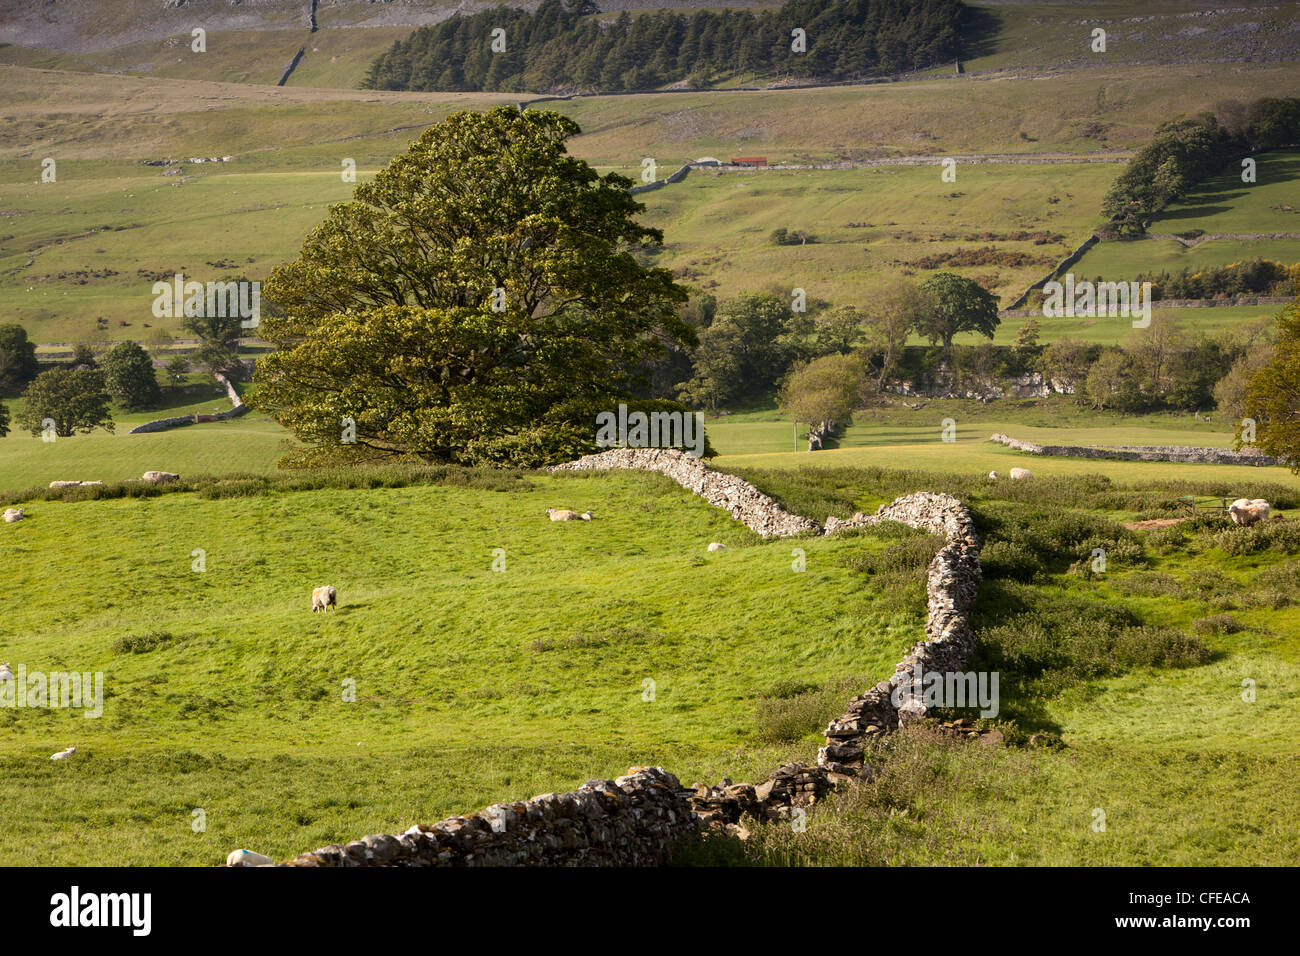 UK, England, Yorkshire, Wensleydale, agriculture, sheep grazing on lush dales farmland divided by dry stone walls Stock Photo